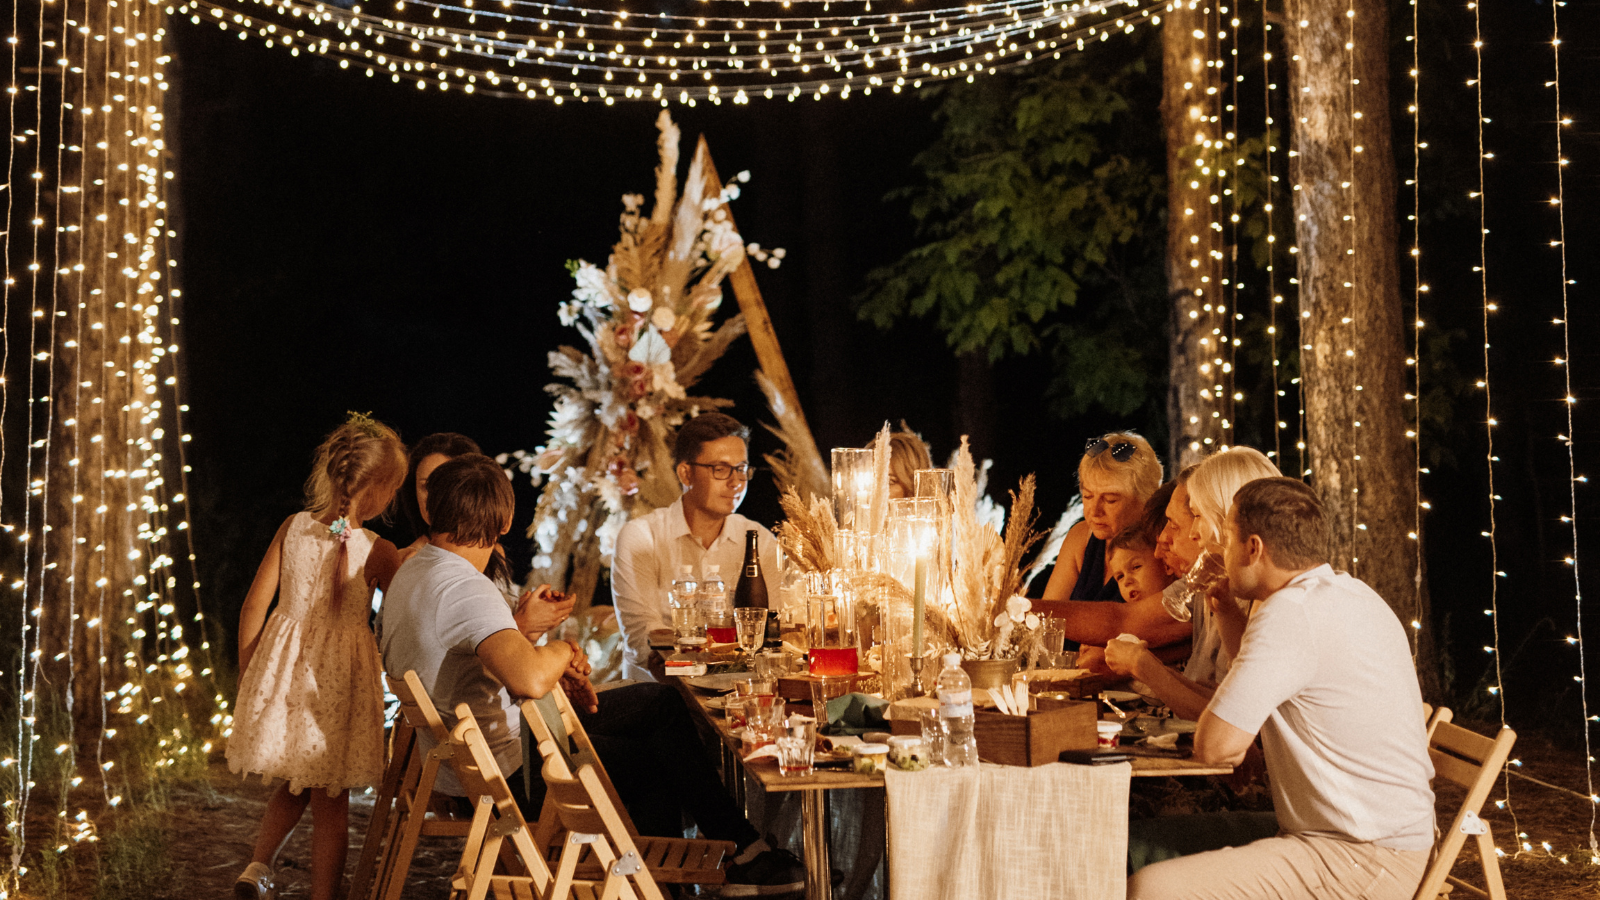 Should You Host a Welcome Party / Rehearsal Dinner?